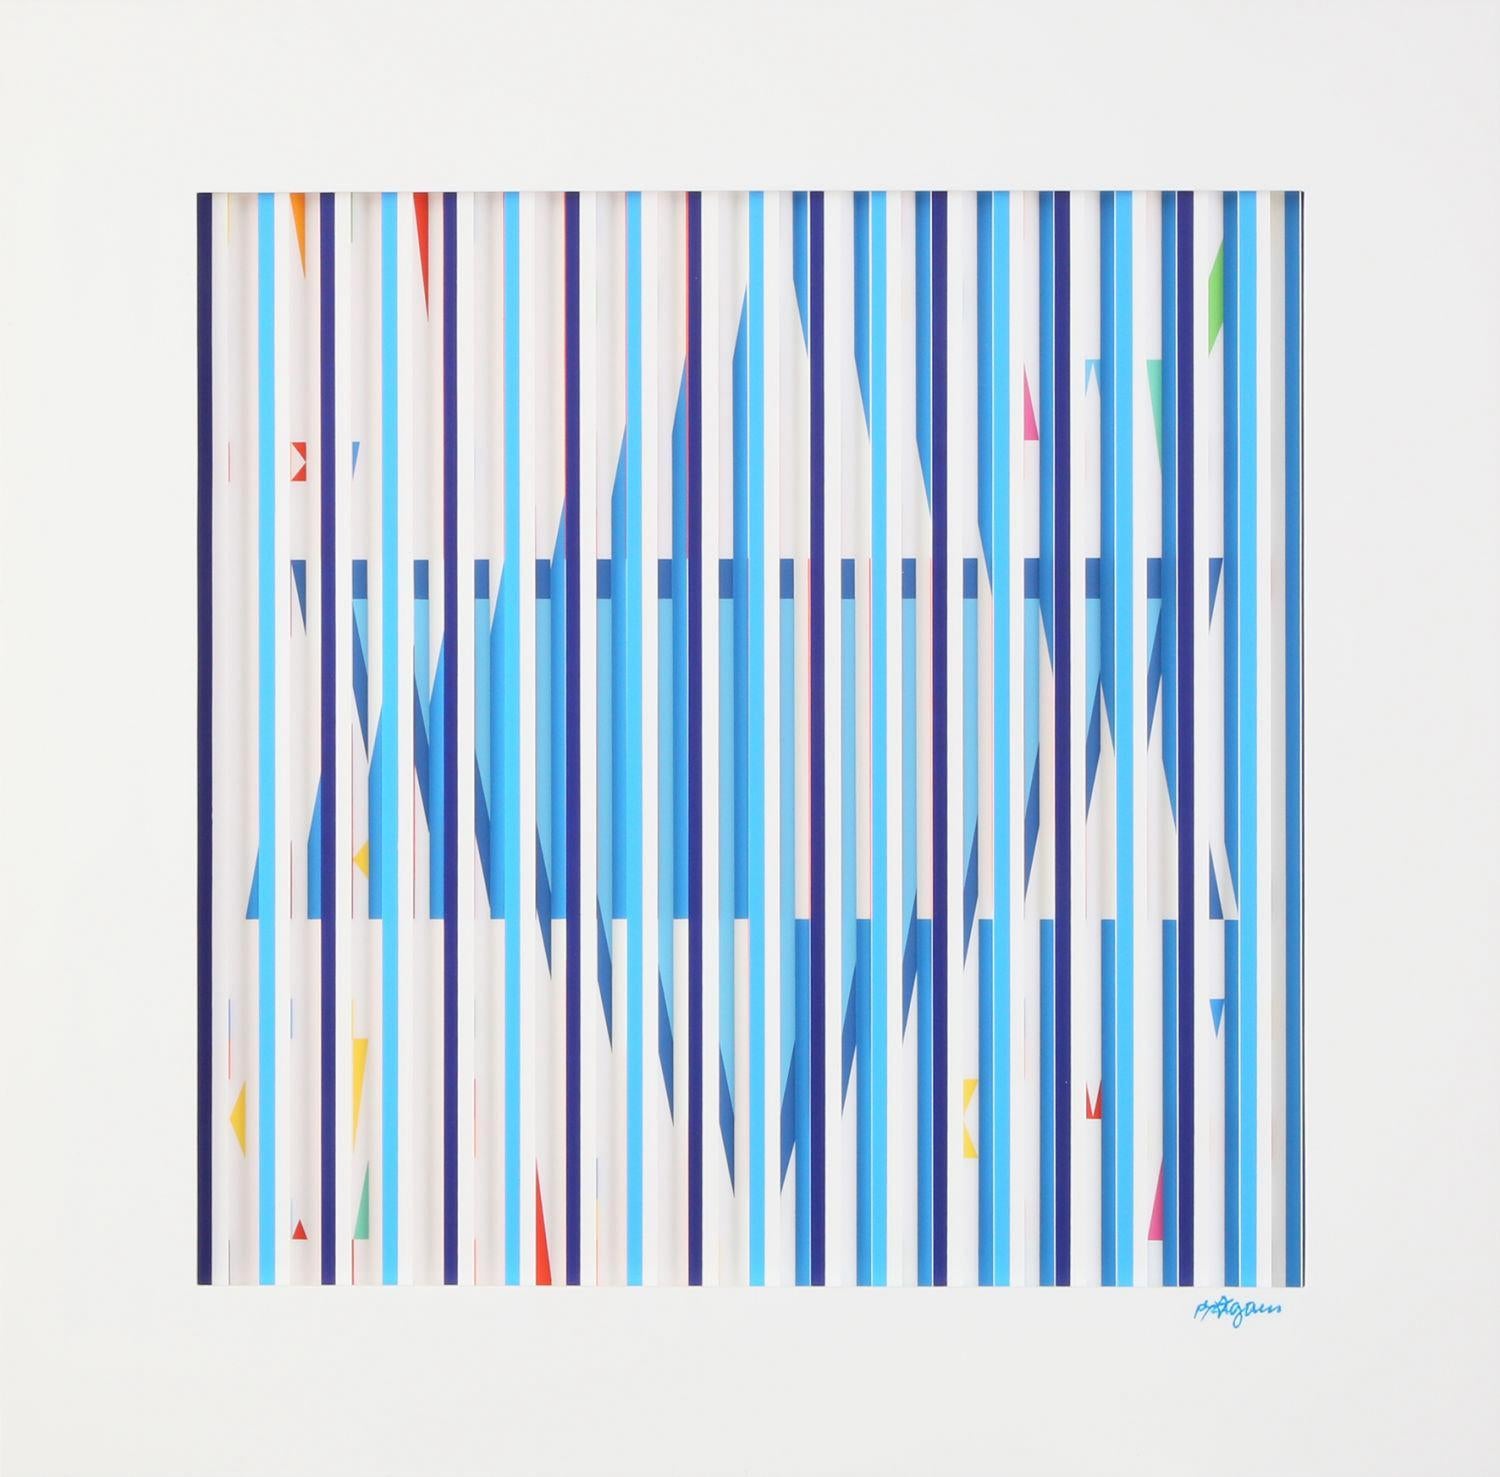 Edition number 74/99

Yaacov Agam, Star of David, Agamograph with Shutter, Colored work, International artist, Israeli artist, Israeli art. Yaacov Agam’s polymorph is a unique example of geometric and kinetic art that changes as the viewer interacts